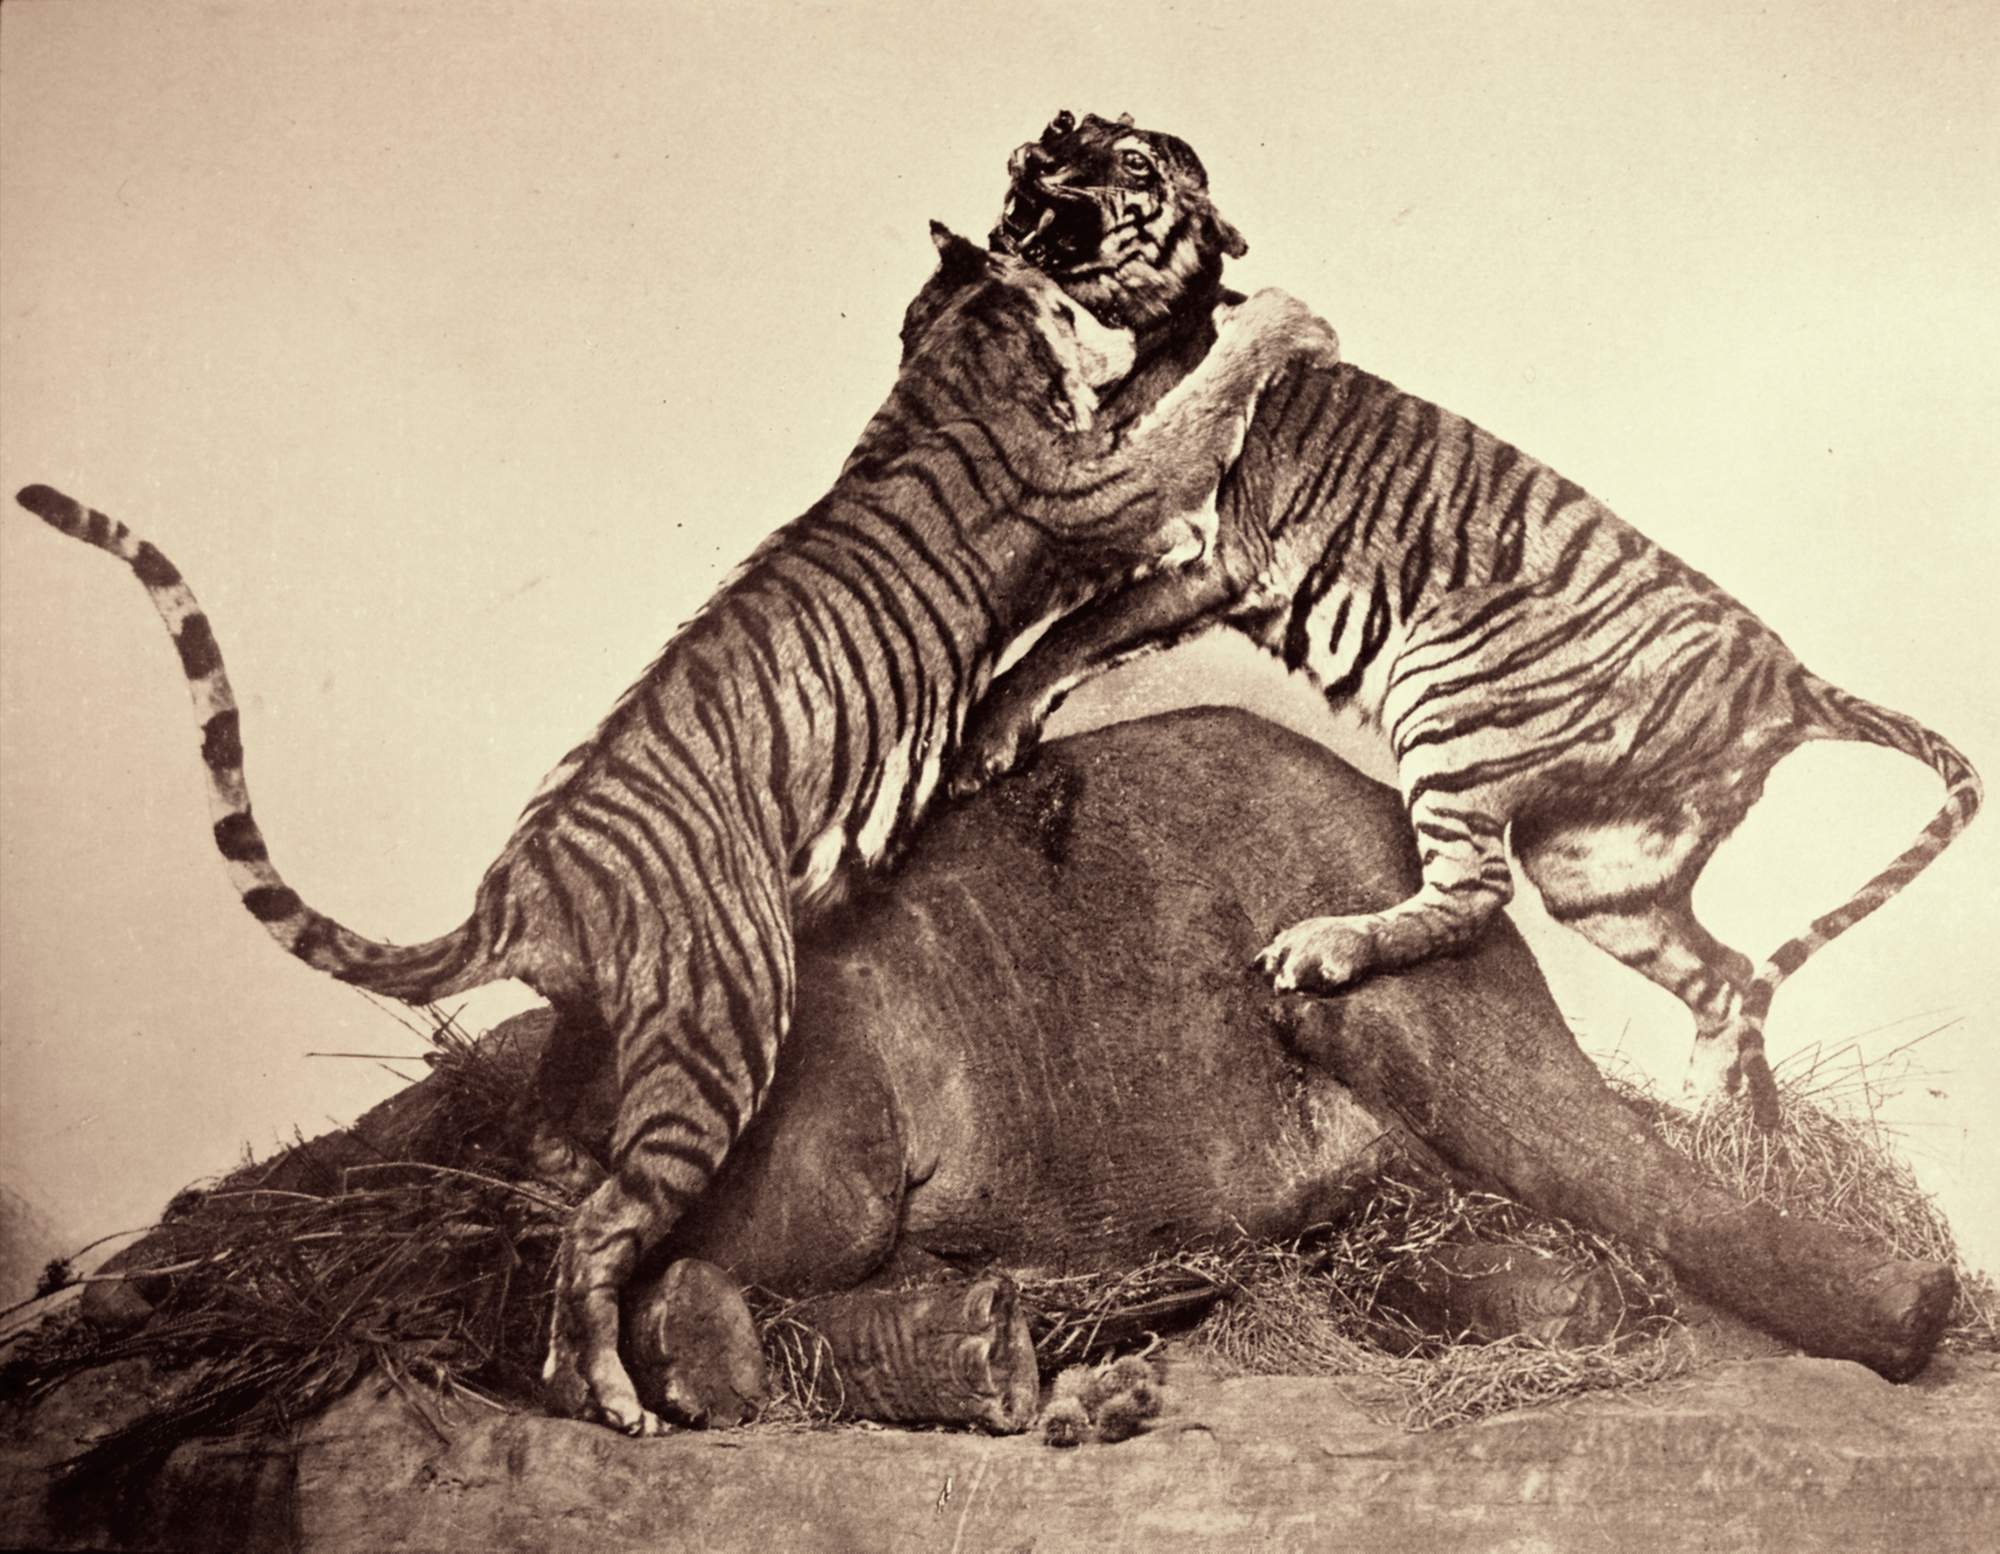 The 1886 ‘Fighting Tigers’ display.